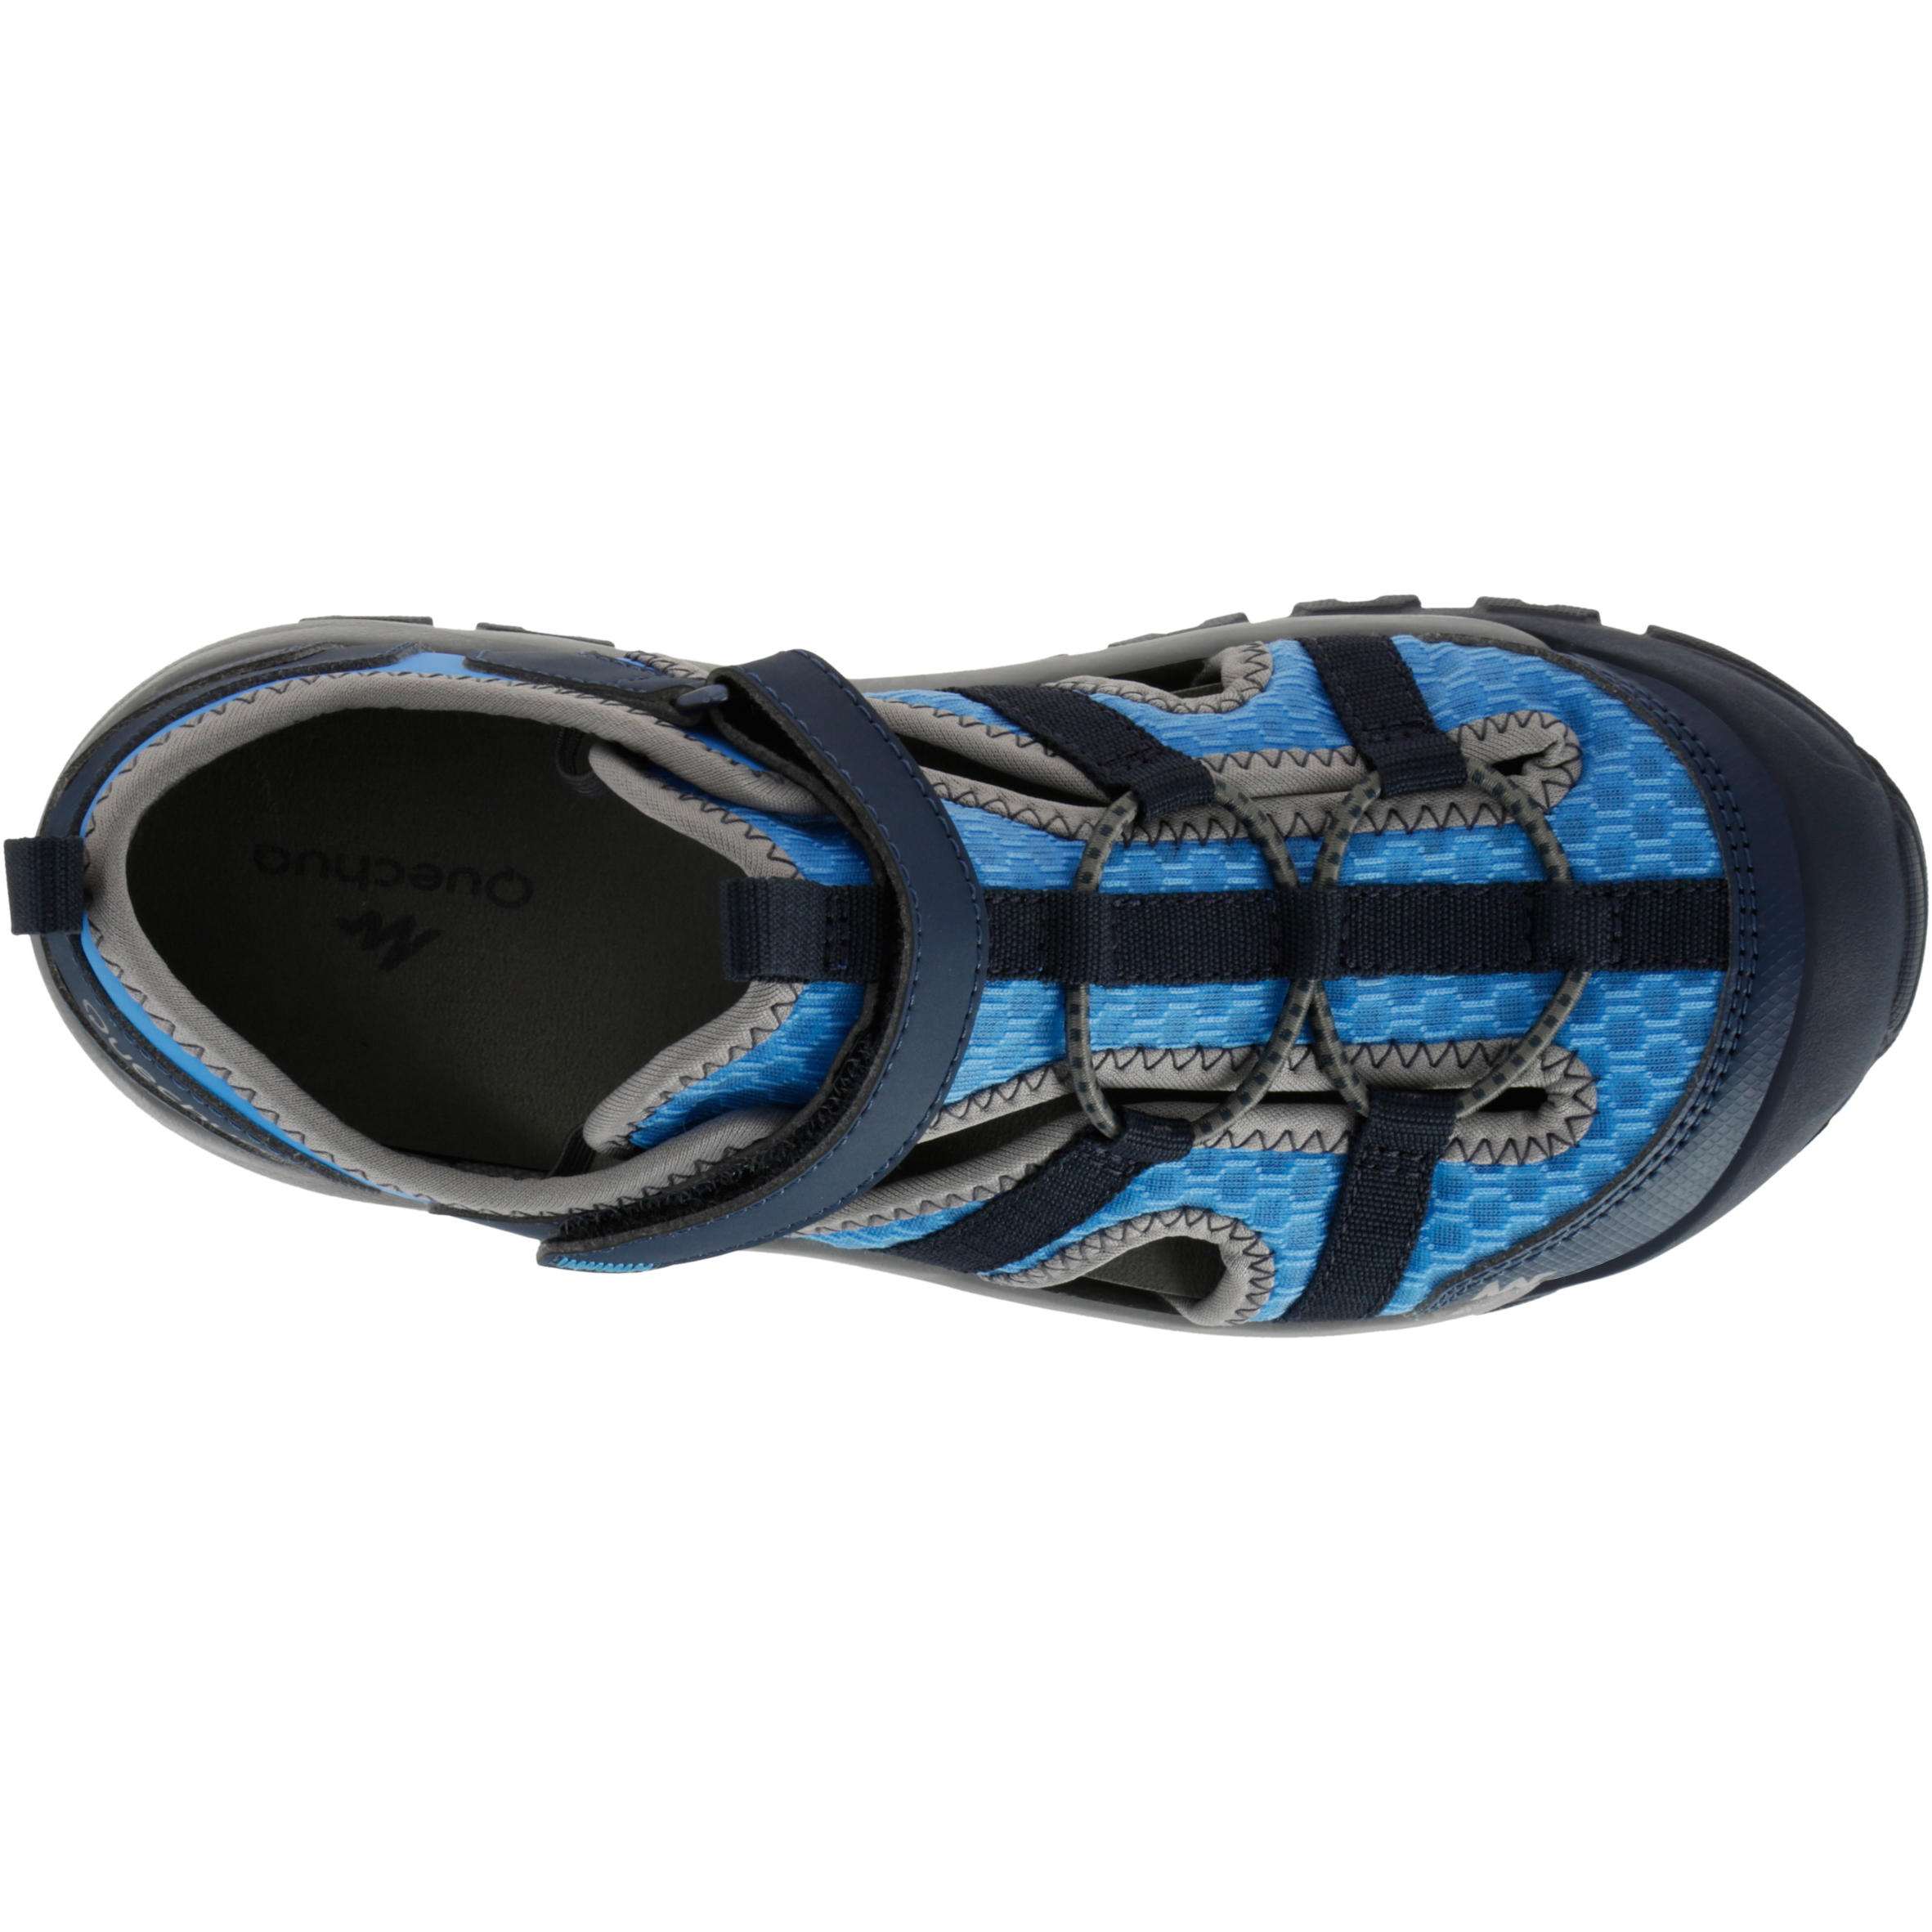 Kids’ Hiking Sandals MH150 - size 10 to 6 - Blue 6/8